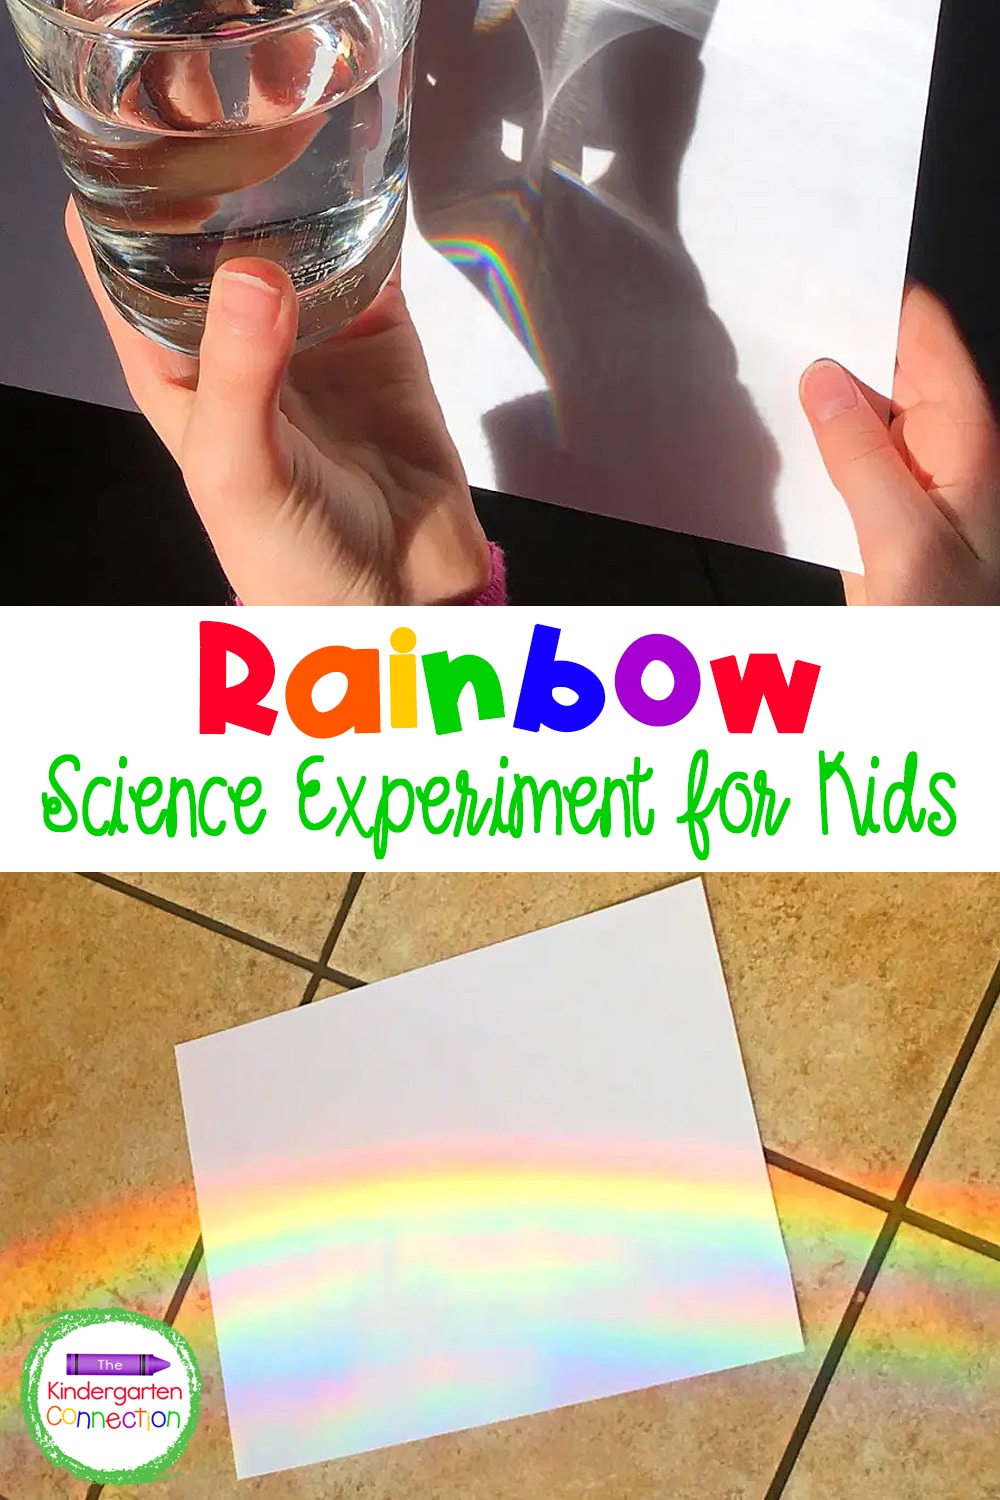 Follow along as we show you how simple it is to make this Rainbow Science Experiment for Kids using supplies you already have on hand!